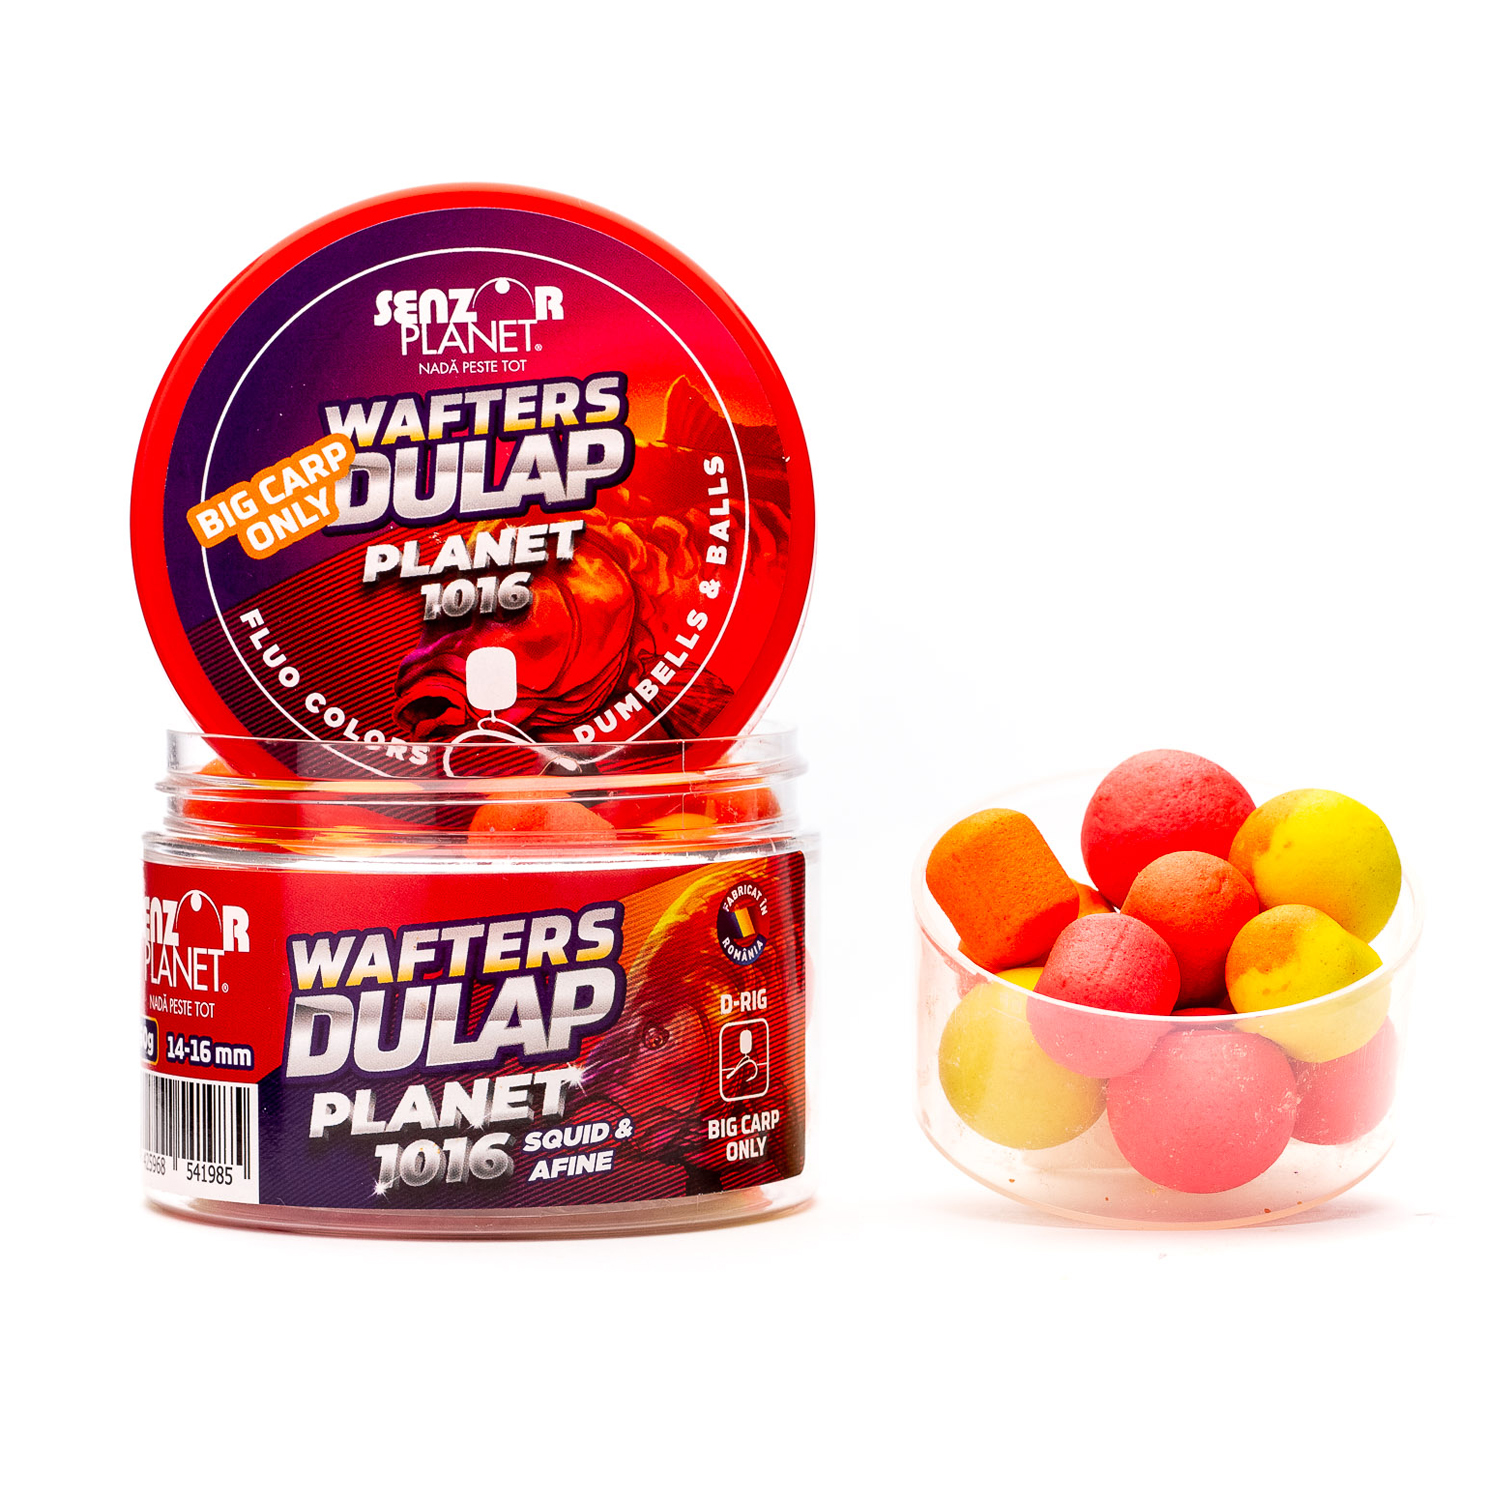 WAFTERS DULAP PLANET 1016 14-16mm 60g